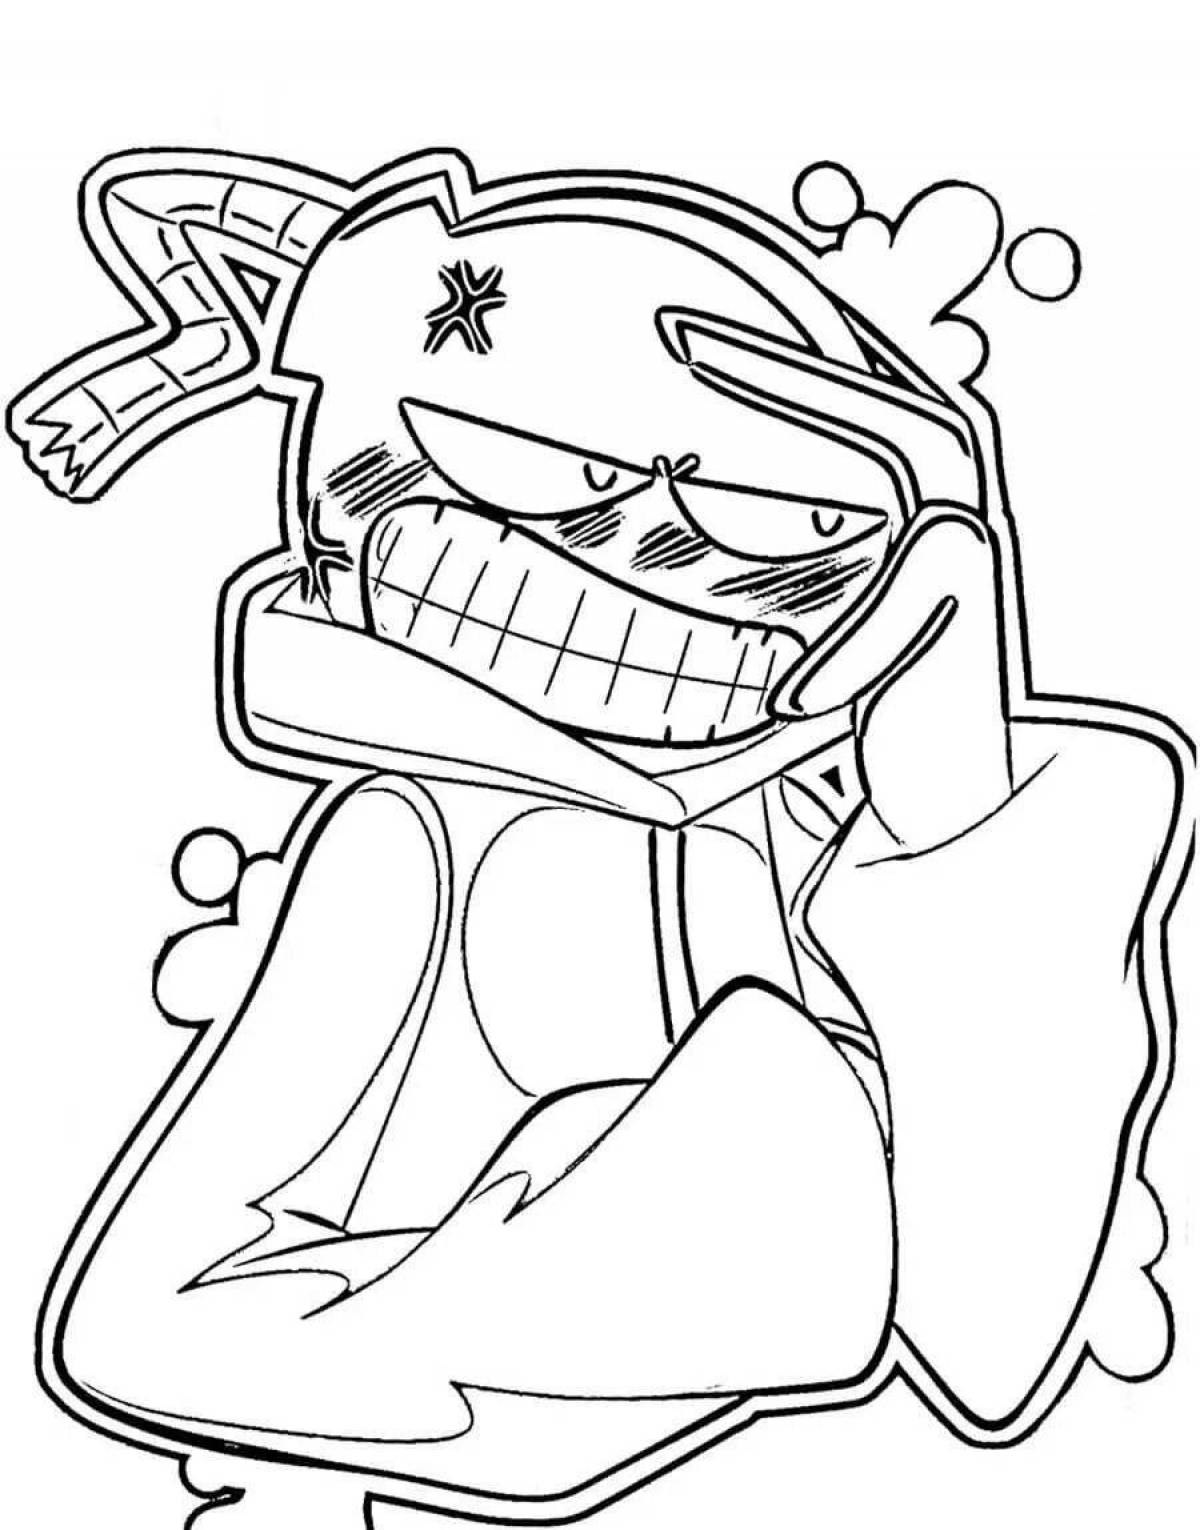 Agoti playful fnf coloring page